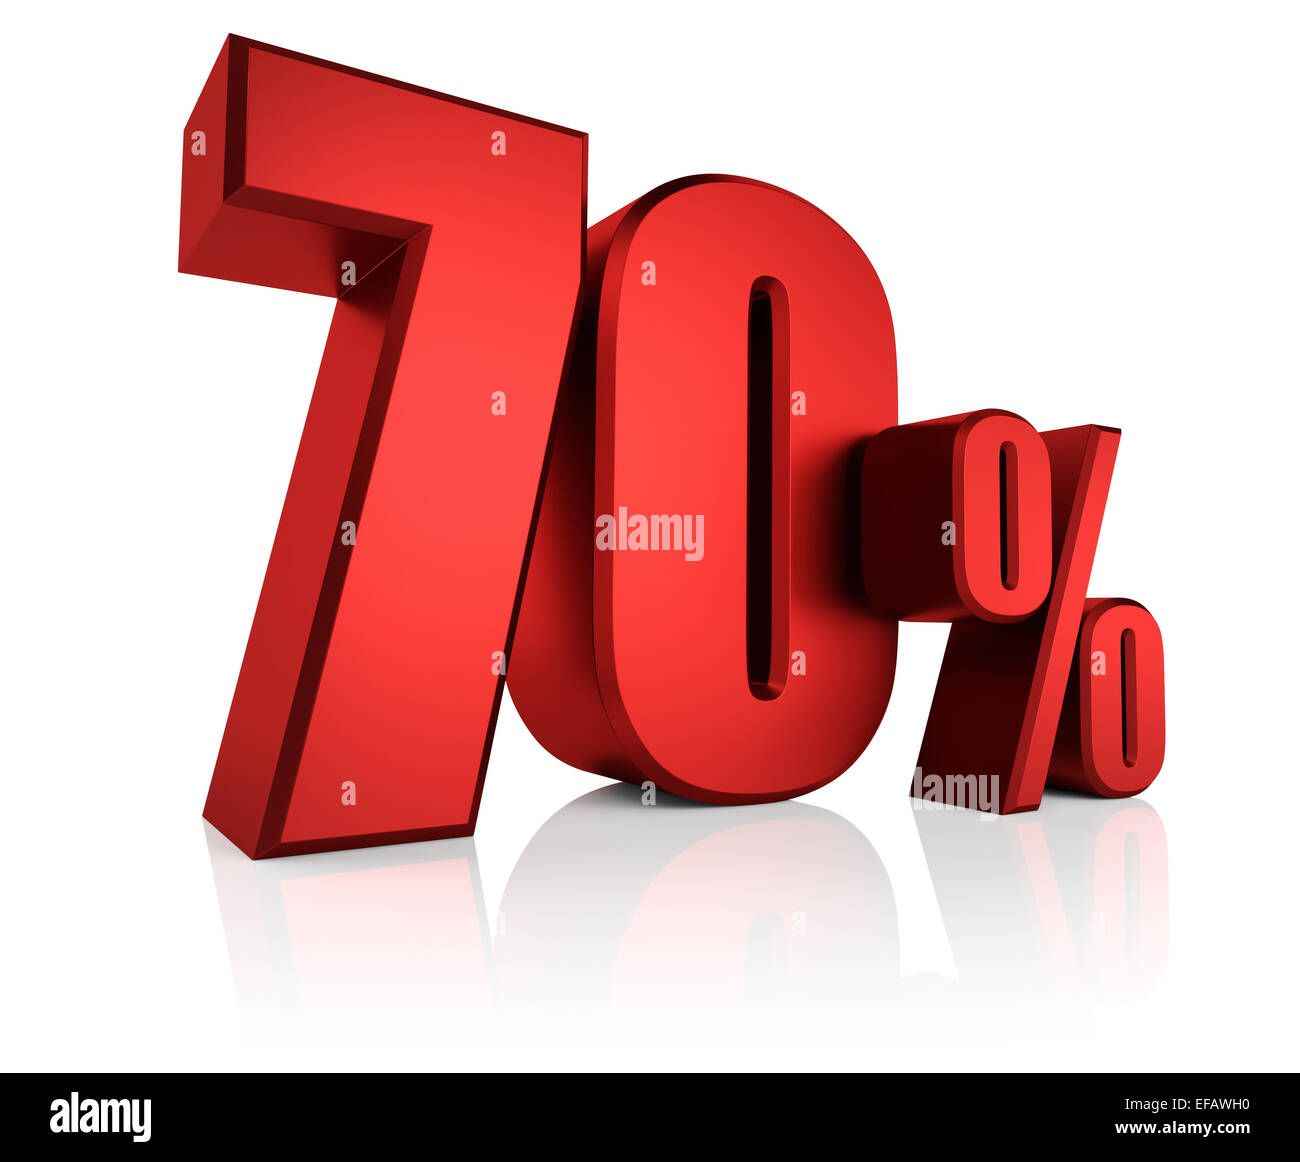 Discount 70 percent off. 3D illustration on white background